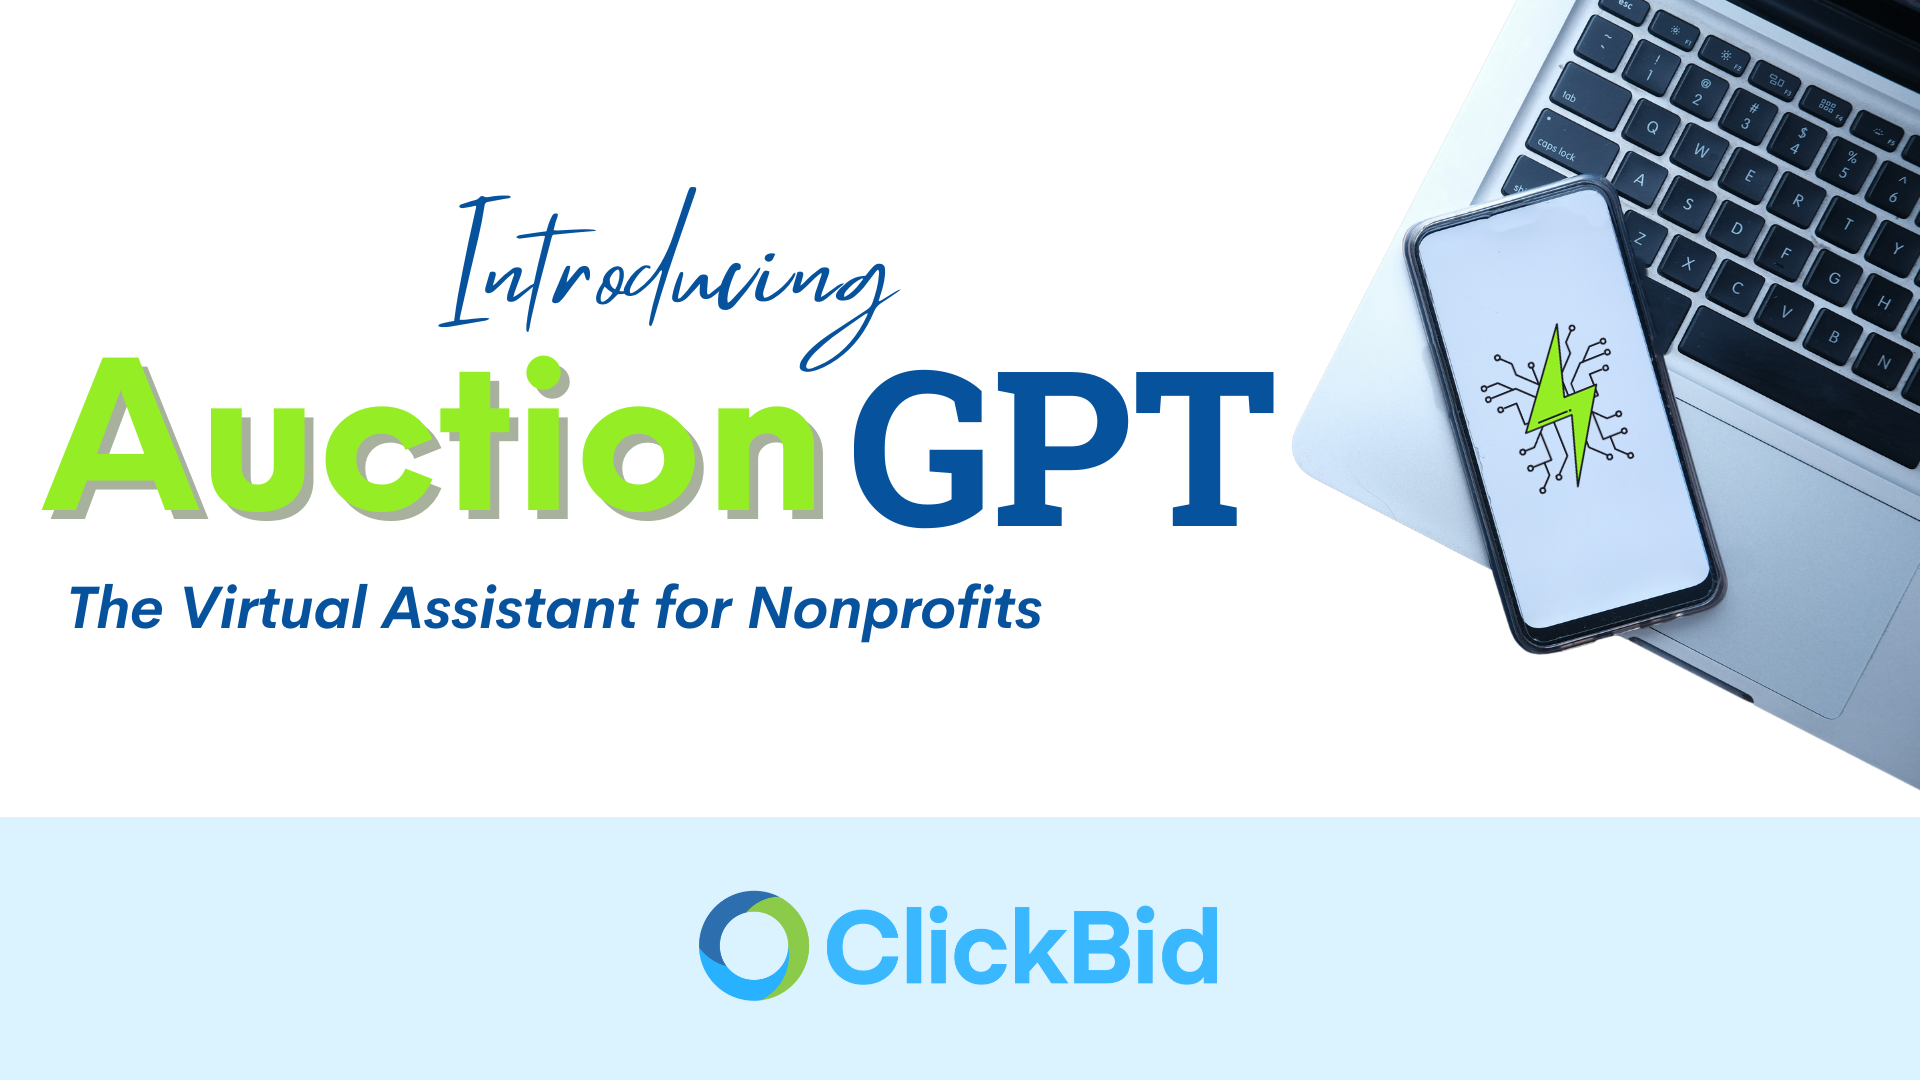 Introducing AuctionGPT: The Virtual Assistant for Nonprofits